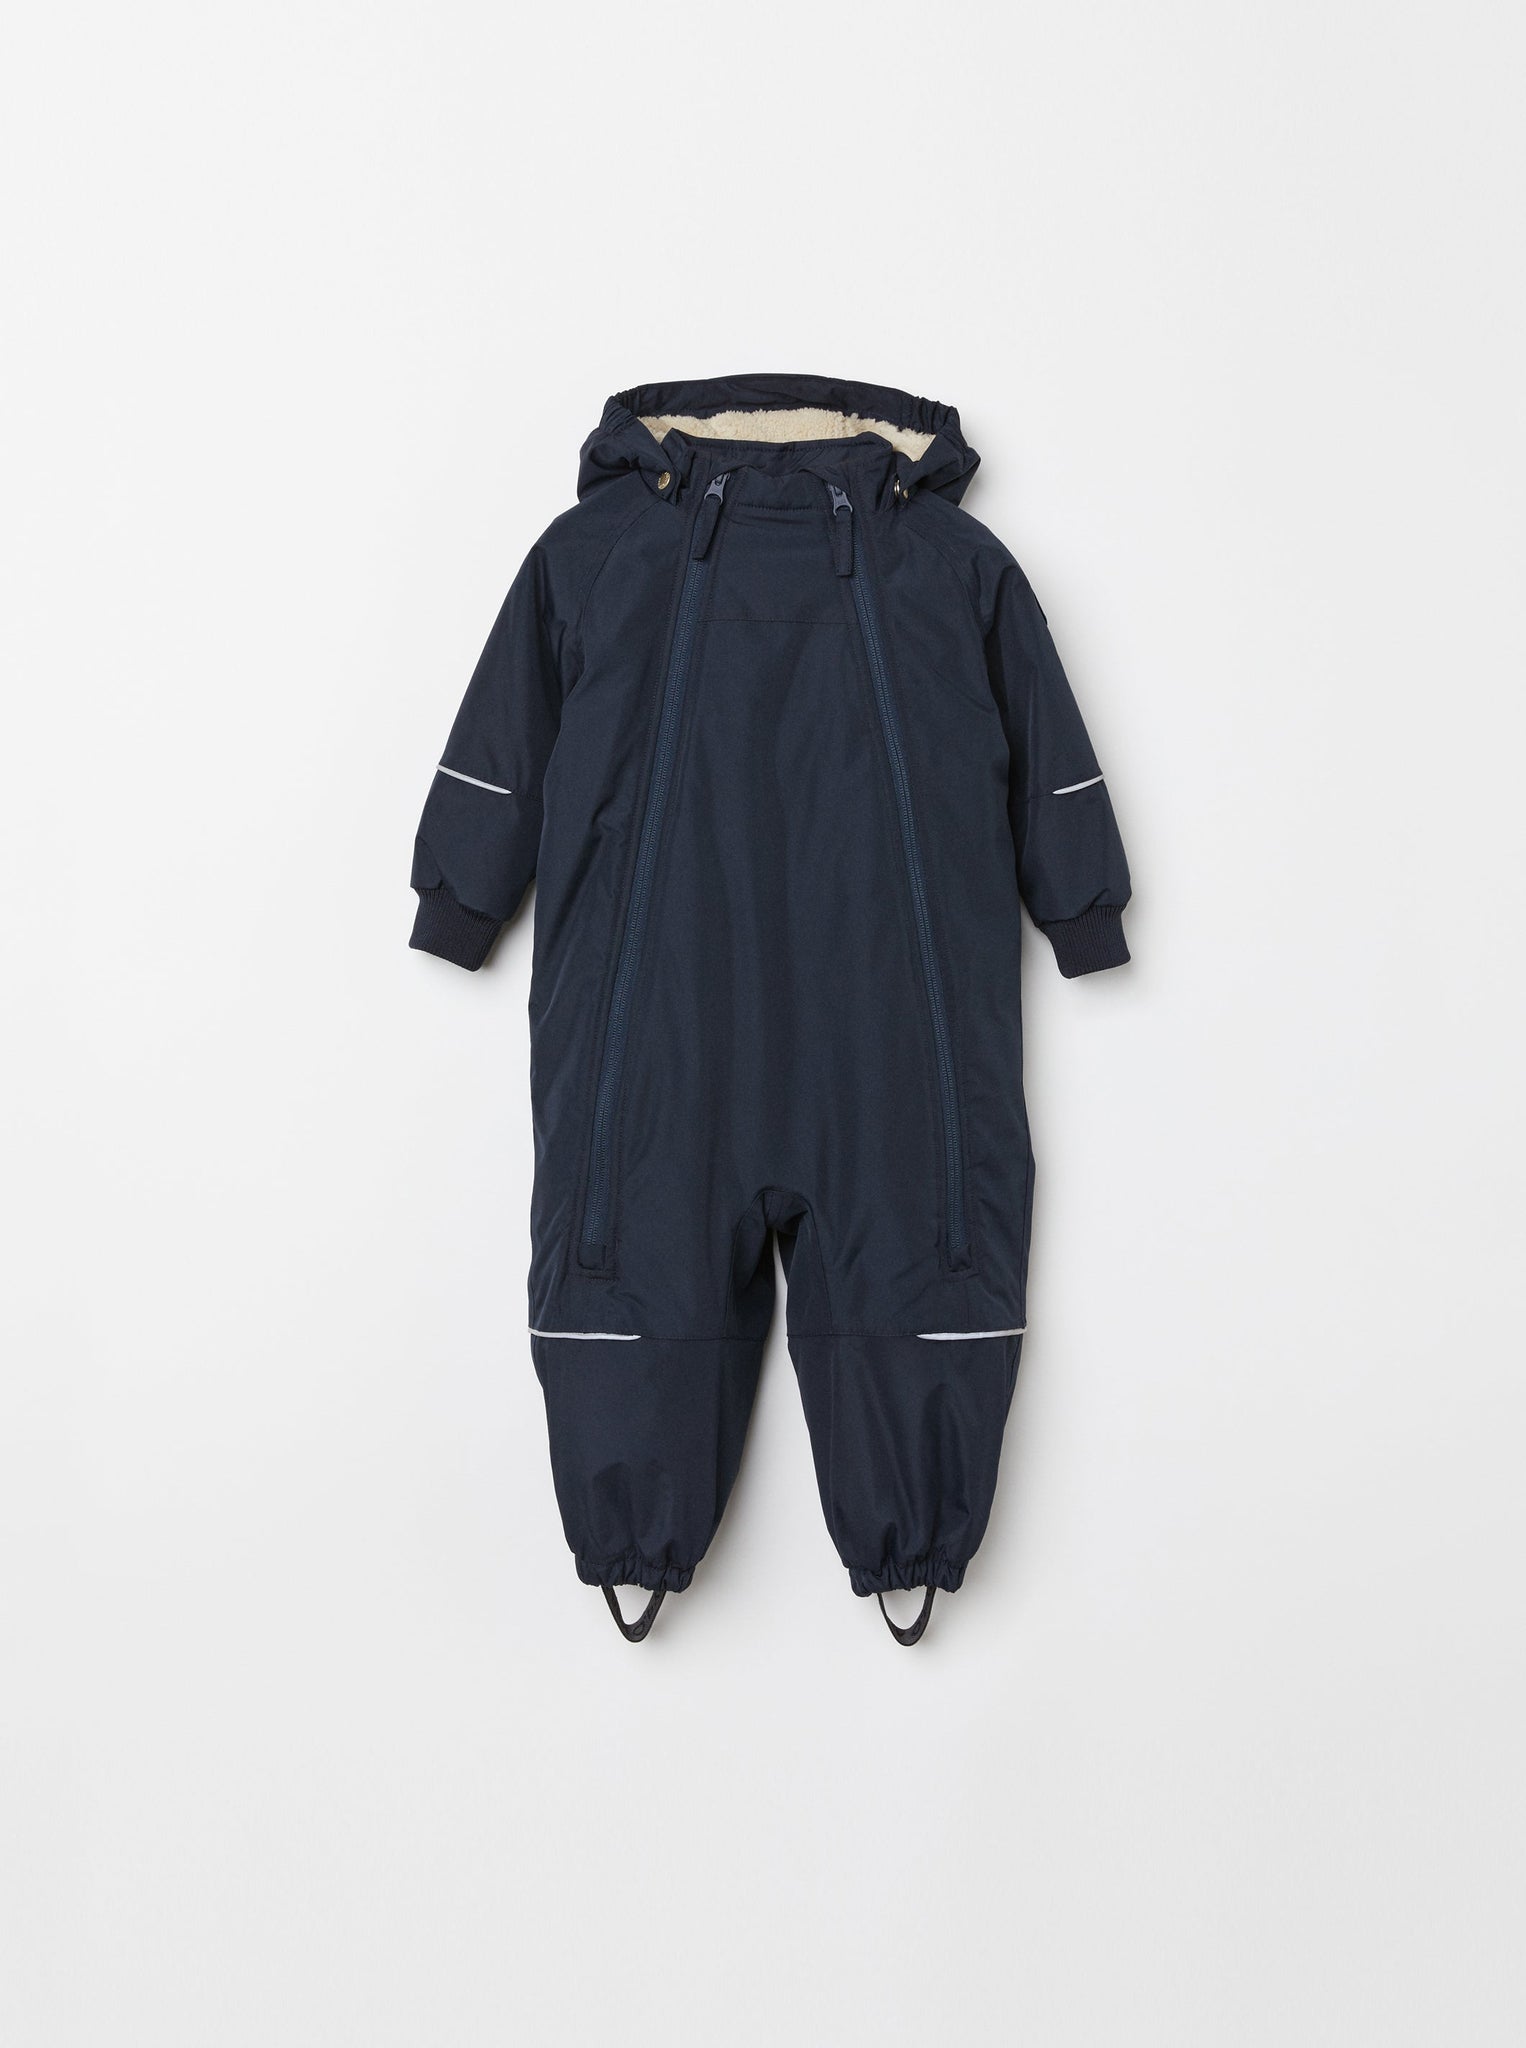 Navy Padded Baby Overall from the Polarn O. Pyret kidswear collection. Quality kids clothing made to last.